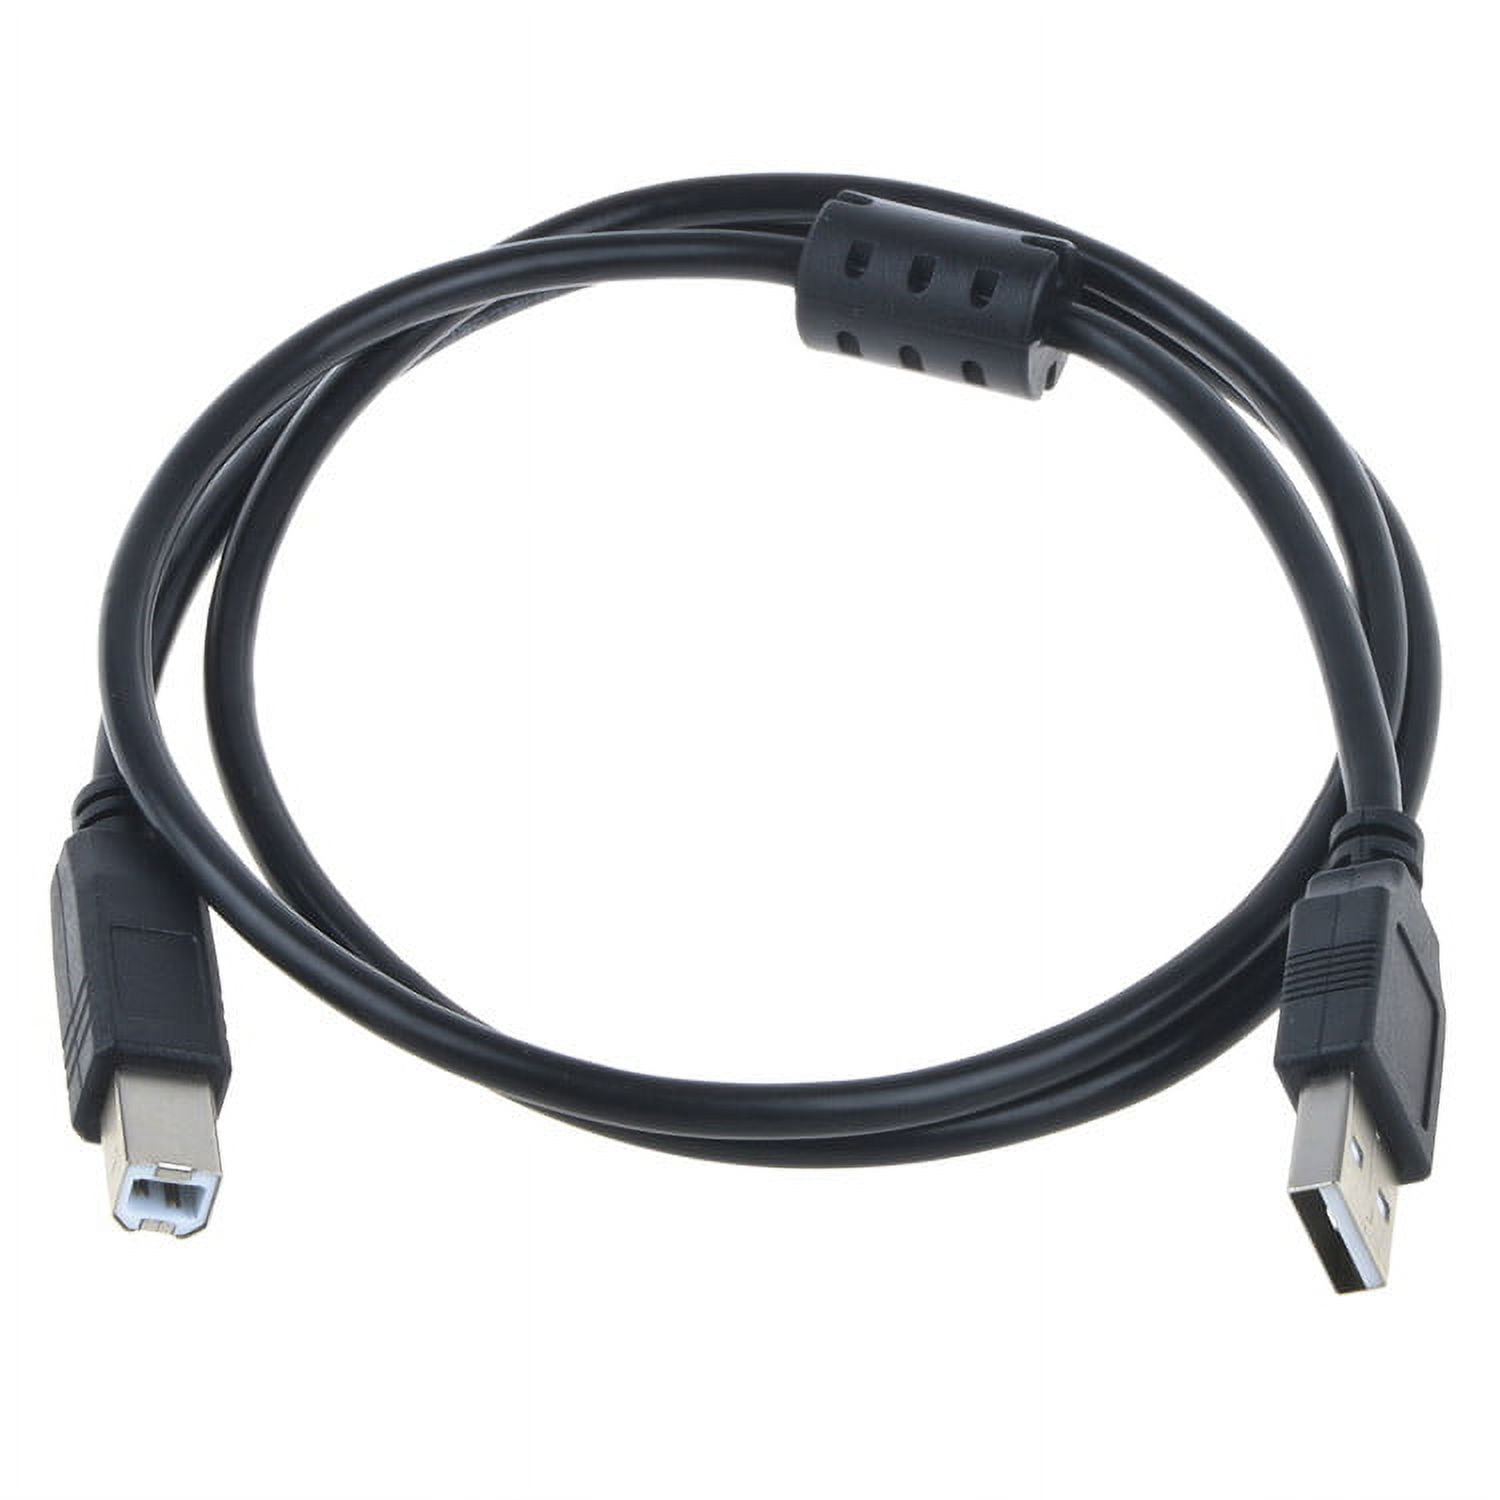 ABLEGRID USB Cable PC Laptop Data Sync Cord For Vestax VCI-300 MK